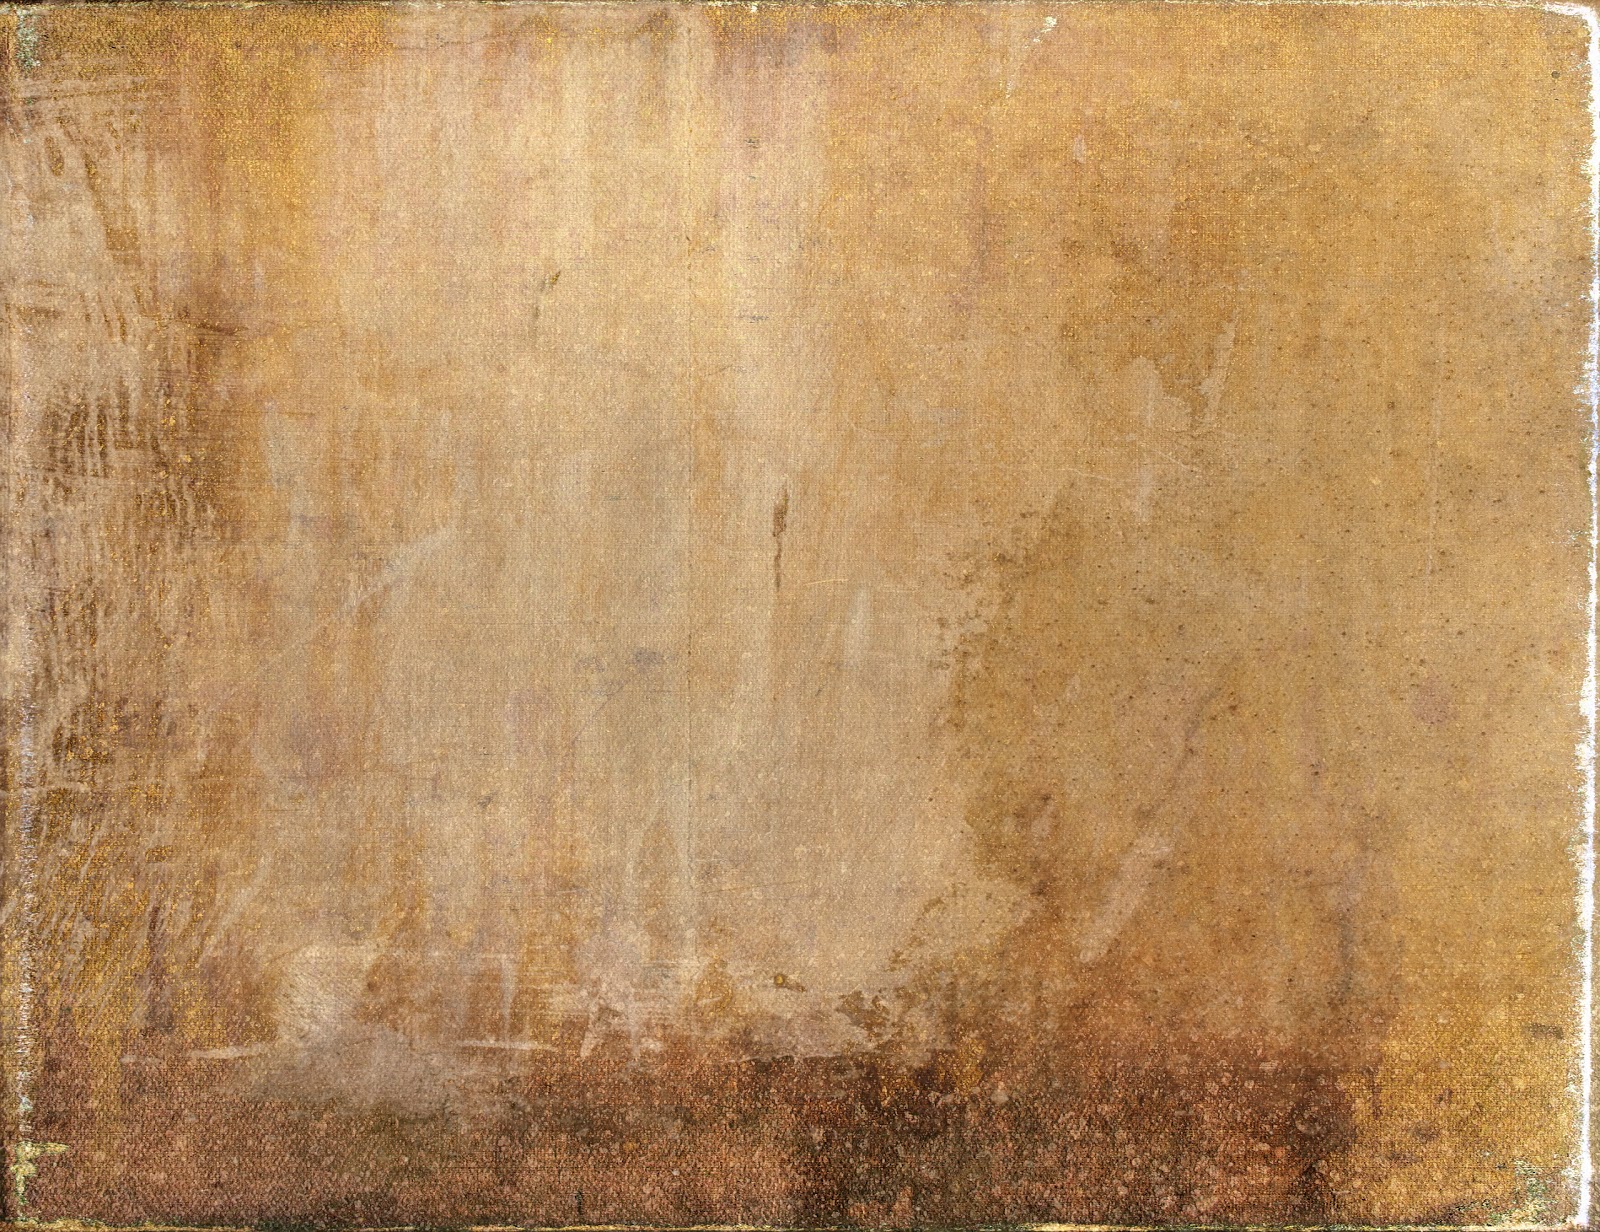 Shadowhouse Creations Old Canvas Texture Set